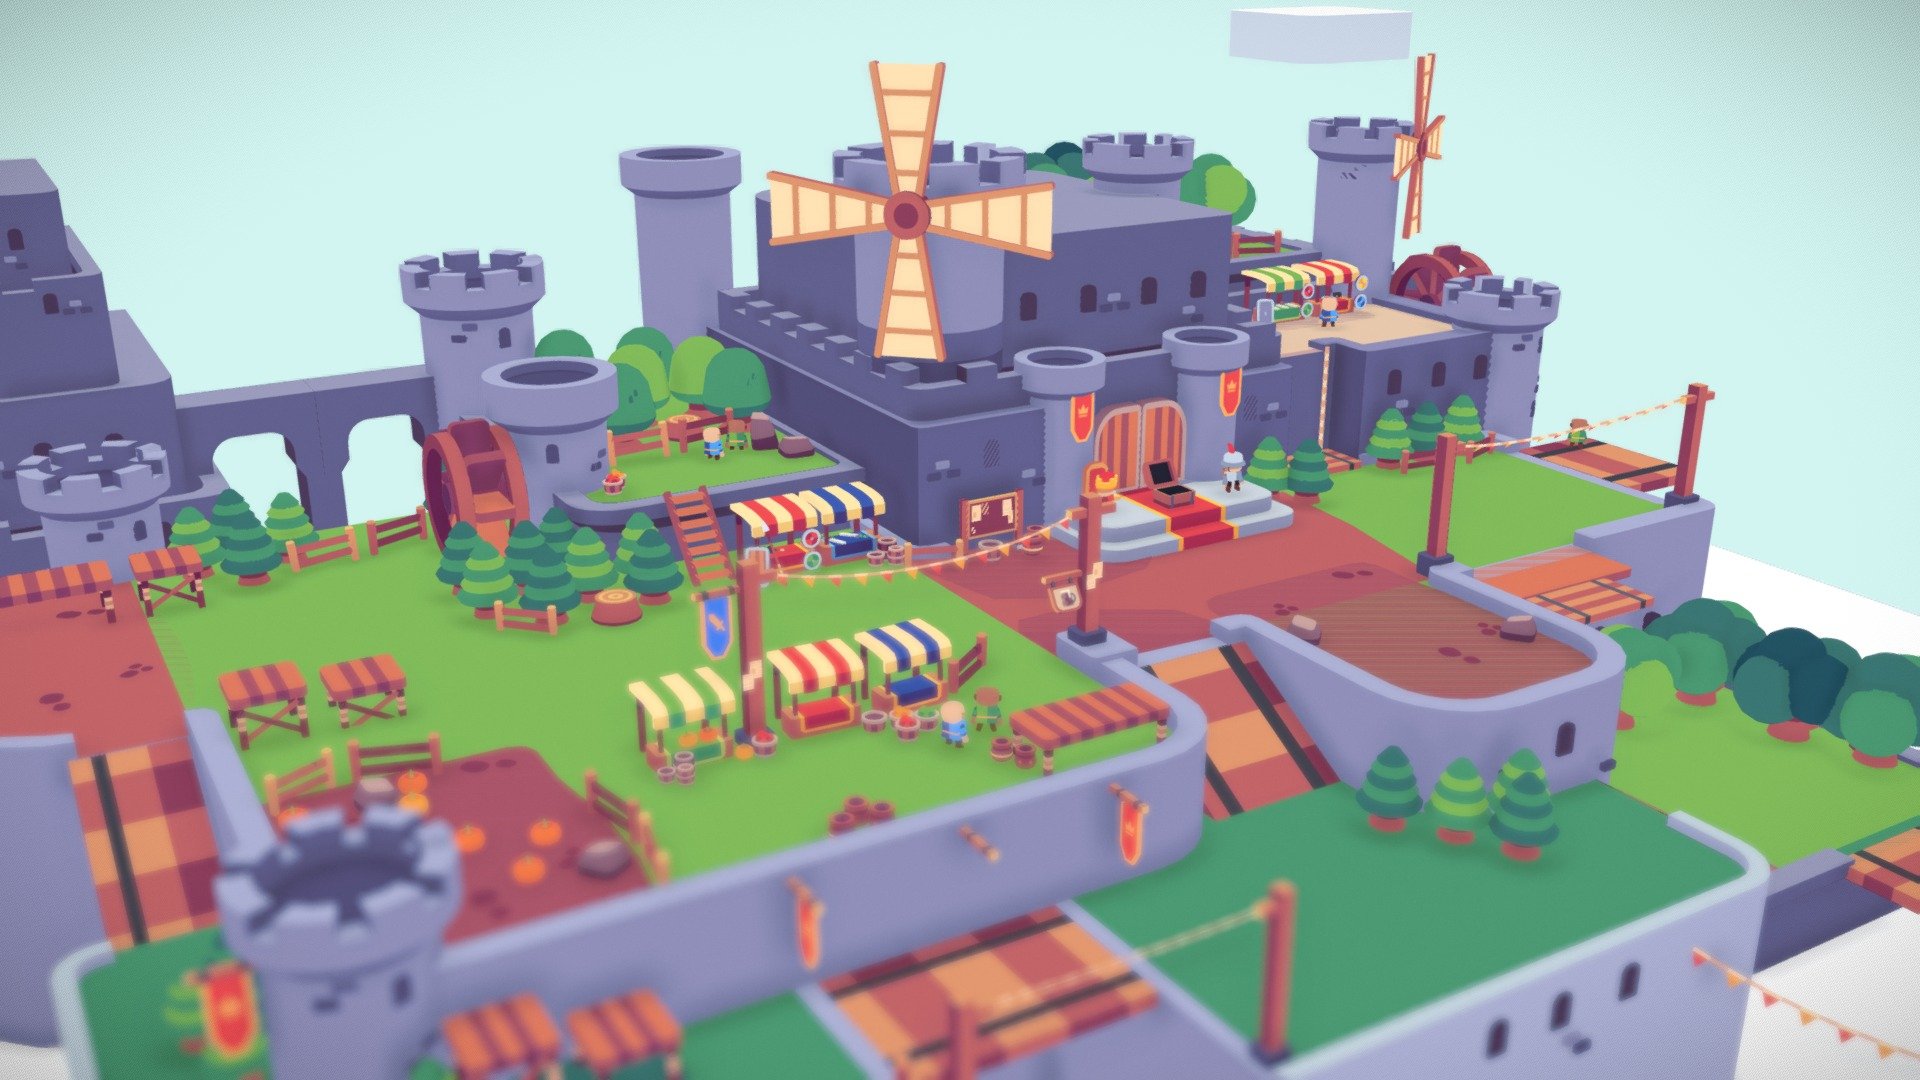 This is a small castle I made for one of my free games; with many windmills, above the clouds.
I also added some small characters. It was my first time rigging but I think it turn out pretty good, I liked it!
Thought it's not translated to english right now, you can see the game here if you want

I hope you like it :) - Castle of the Wind - 3D model by Itey 3d model